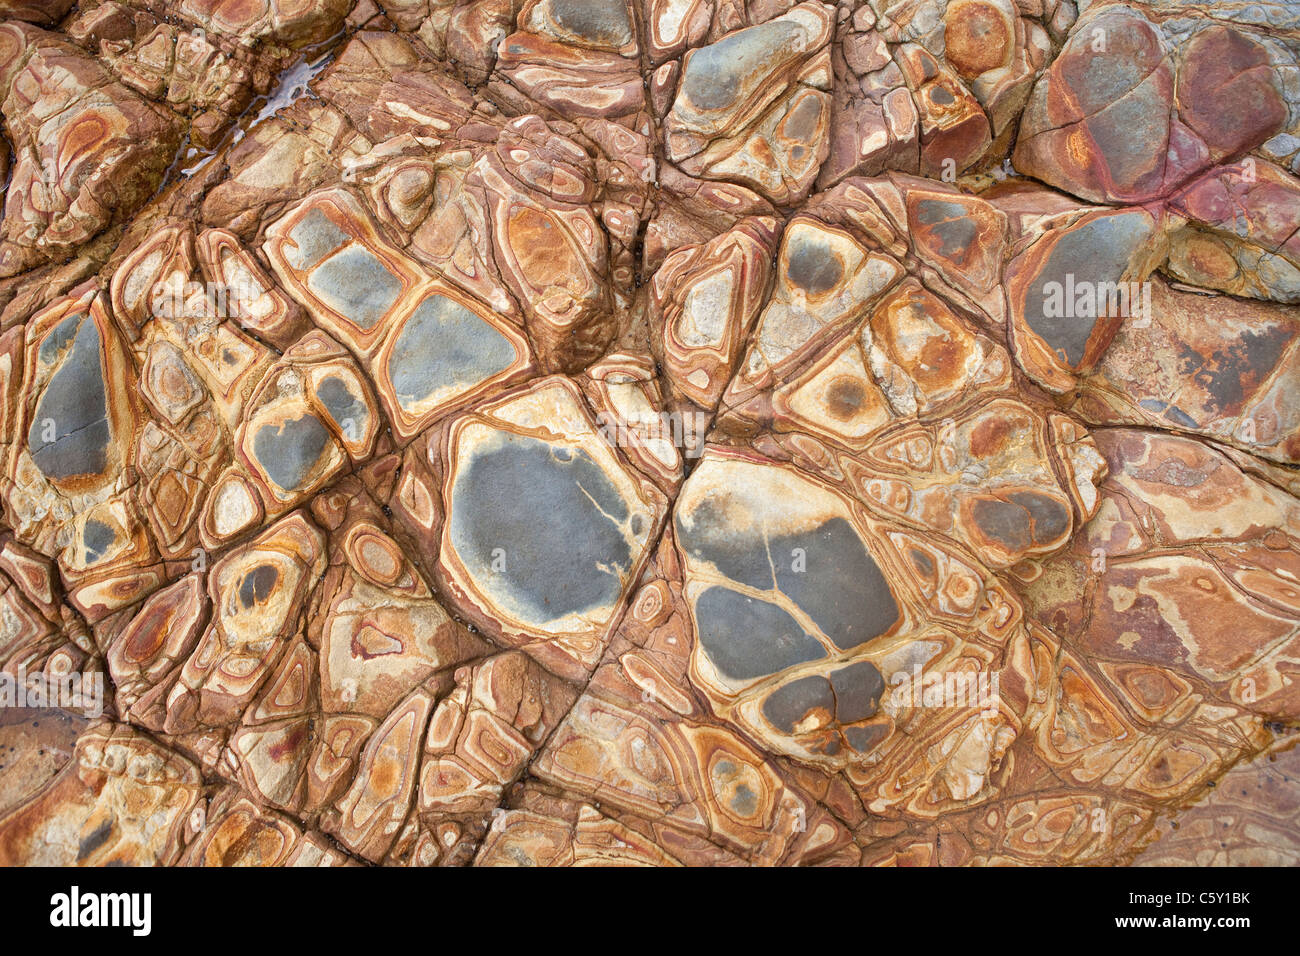 Tidal pool stone texture at low tide. Stock Photo